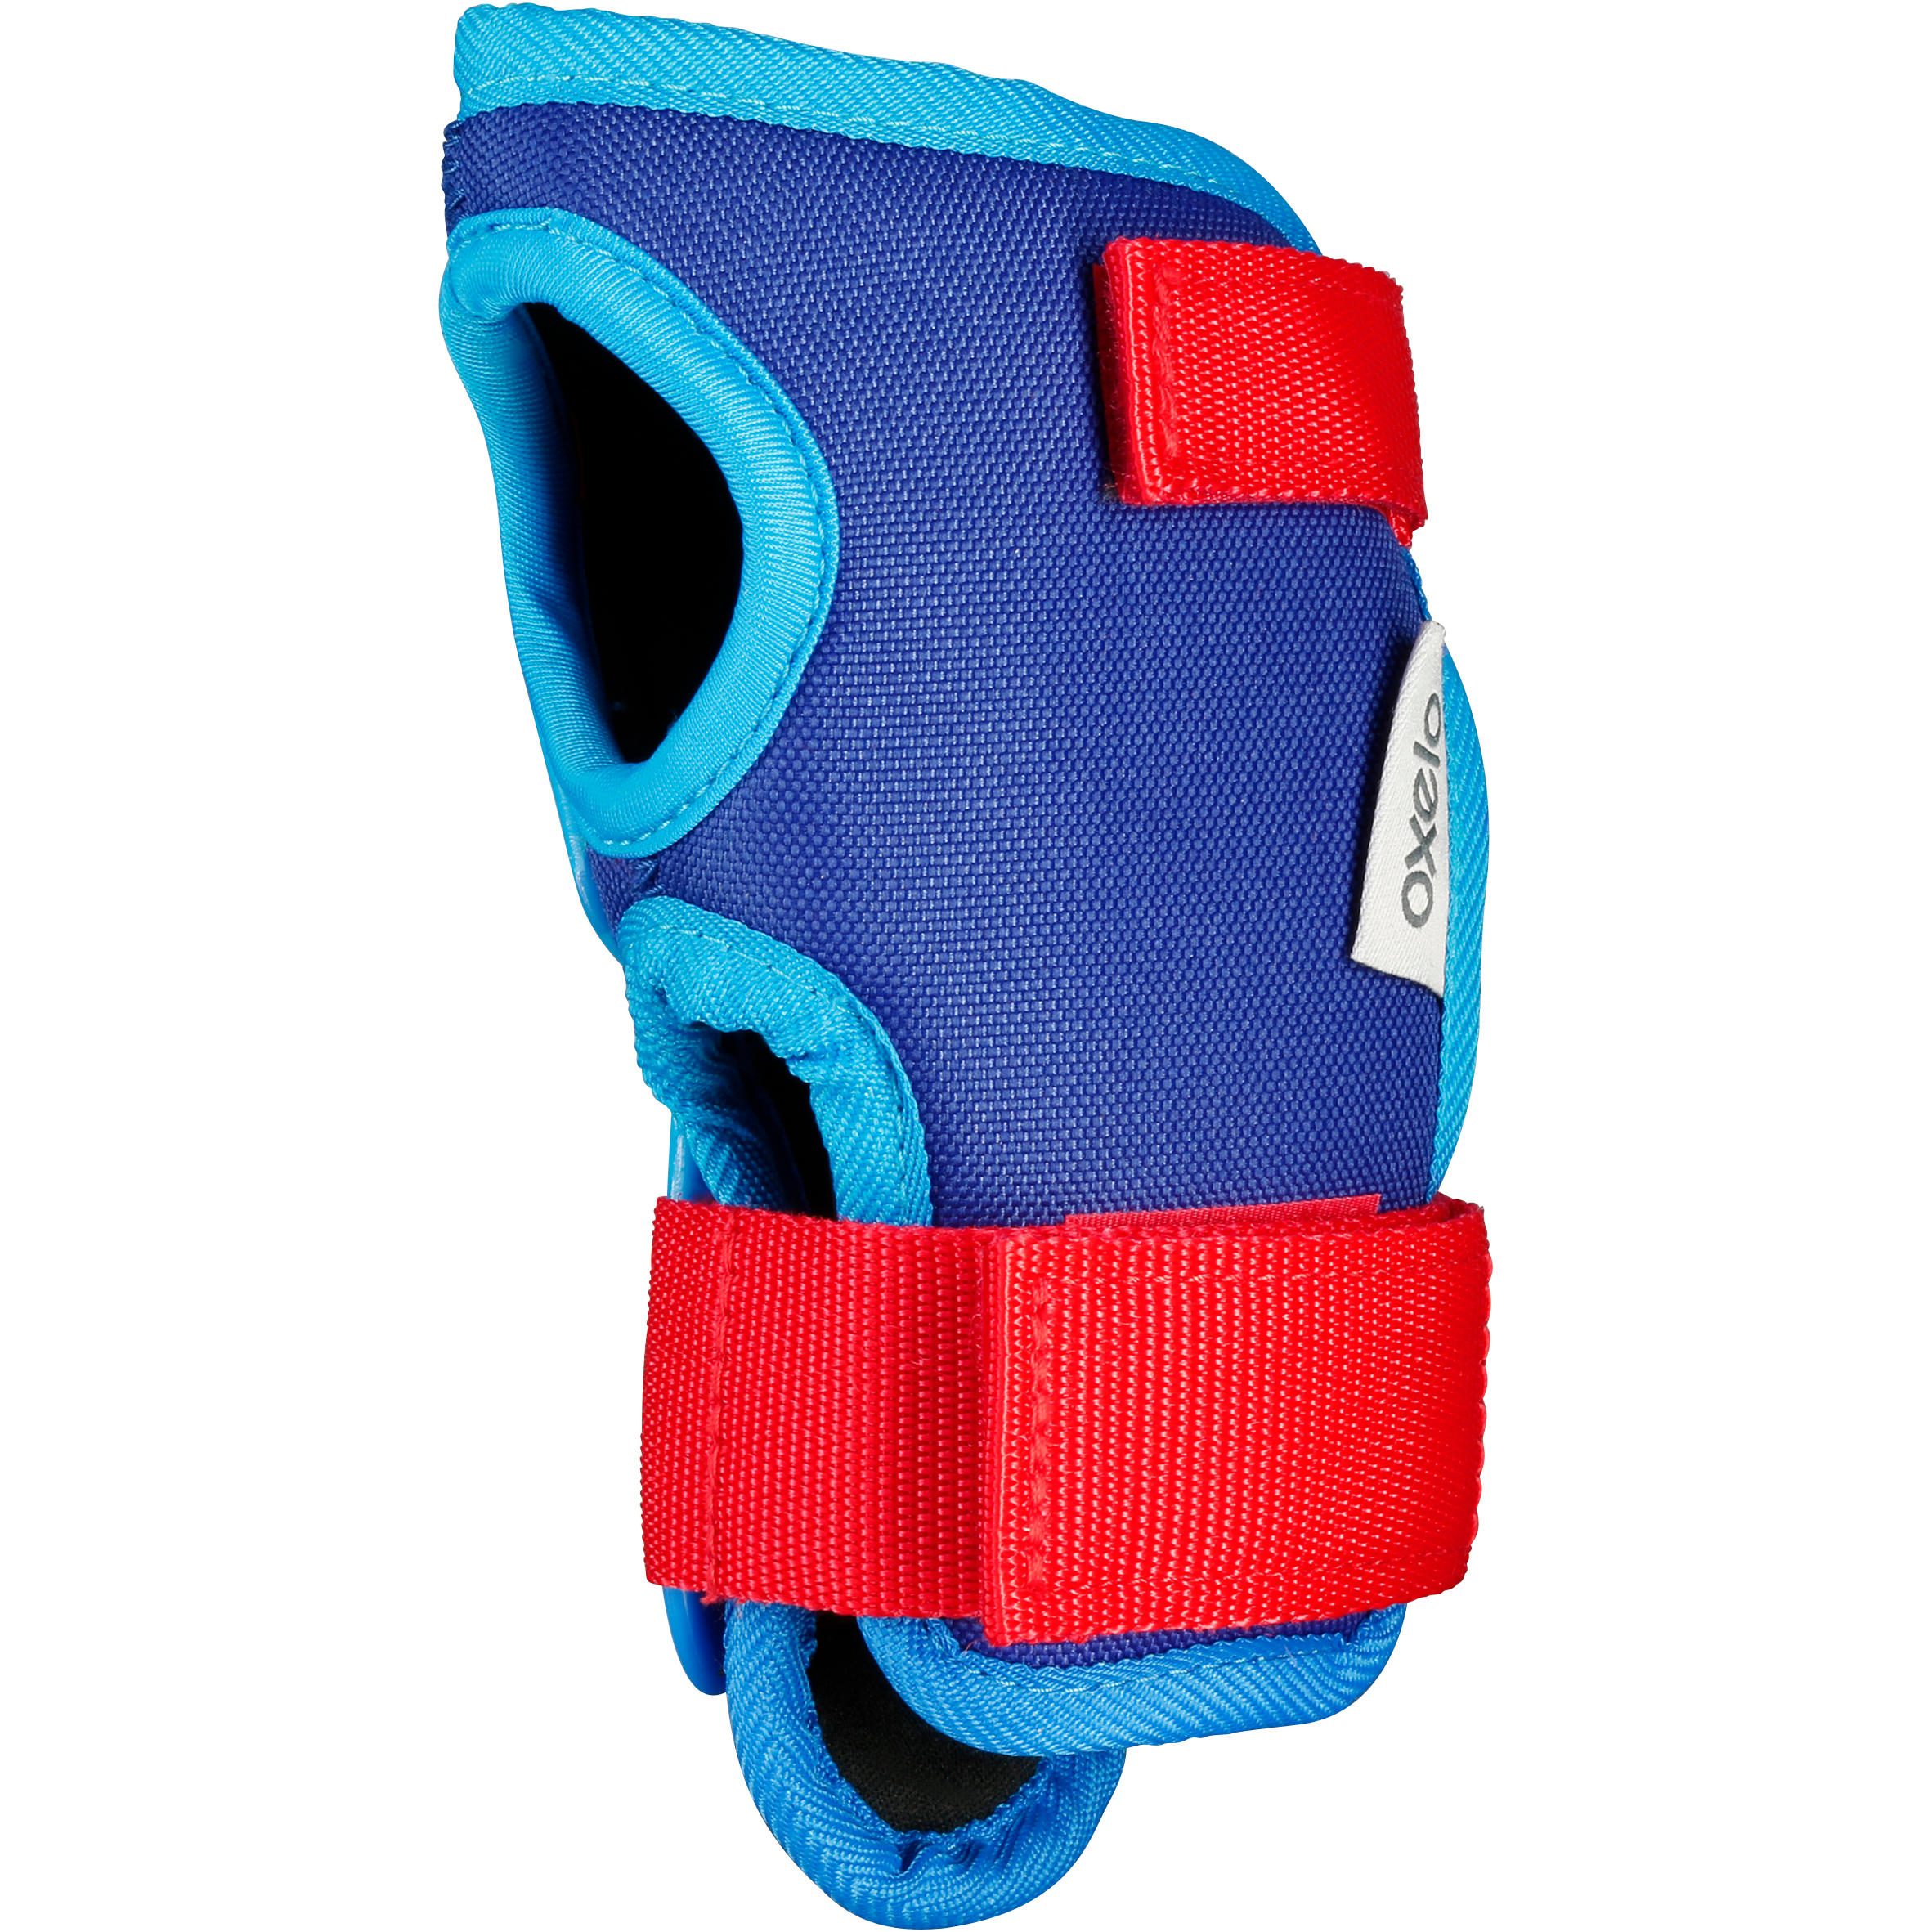 Kids' Inline Skate Protection Set - Blue/Red - OXELO